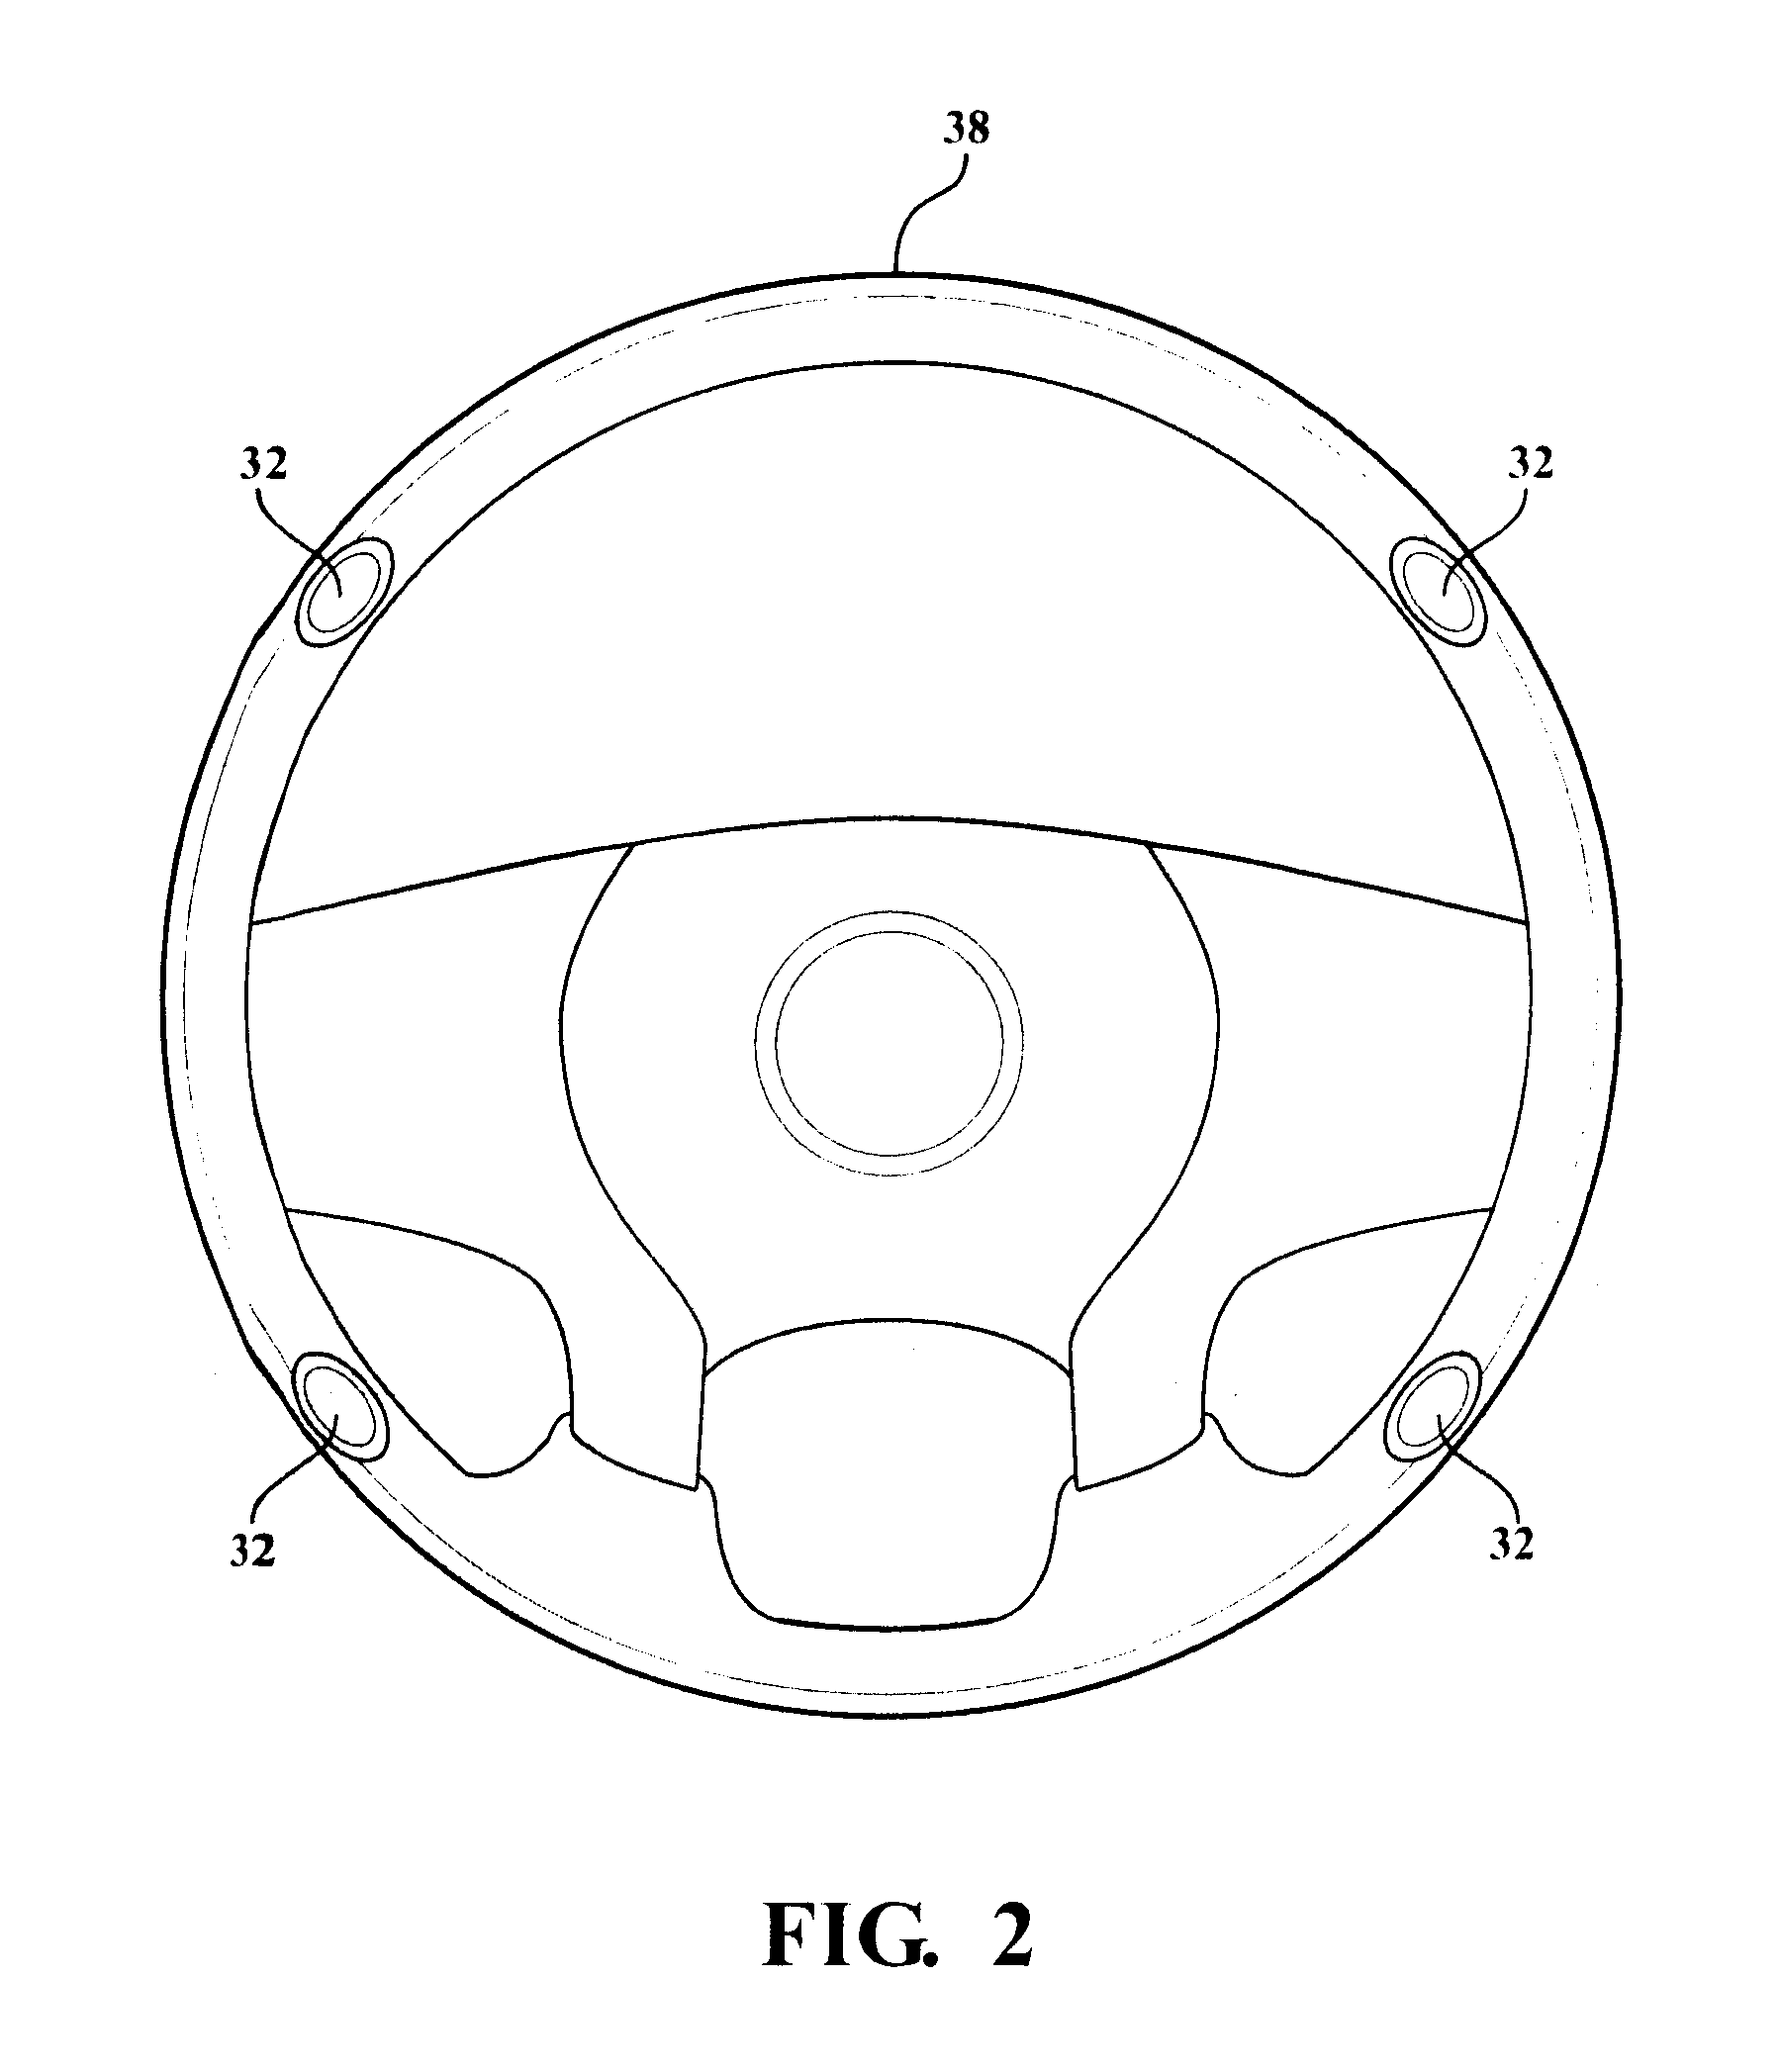 Method and system for controlling the behavior of an occupant of a vehicle